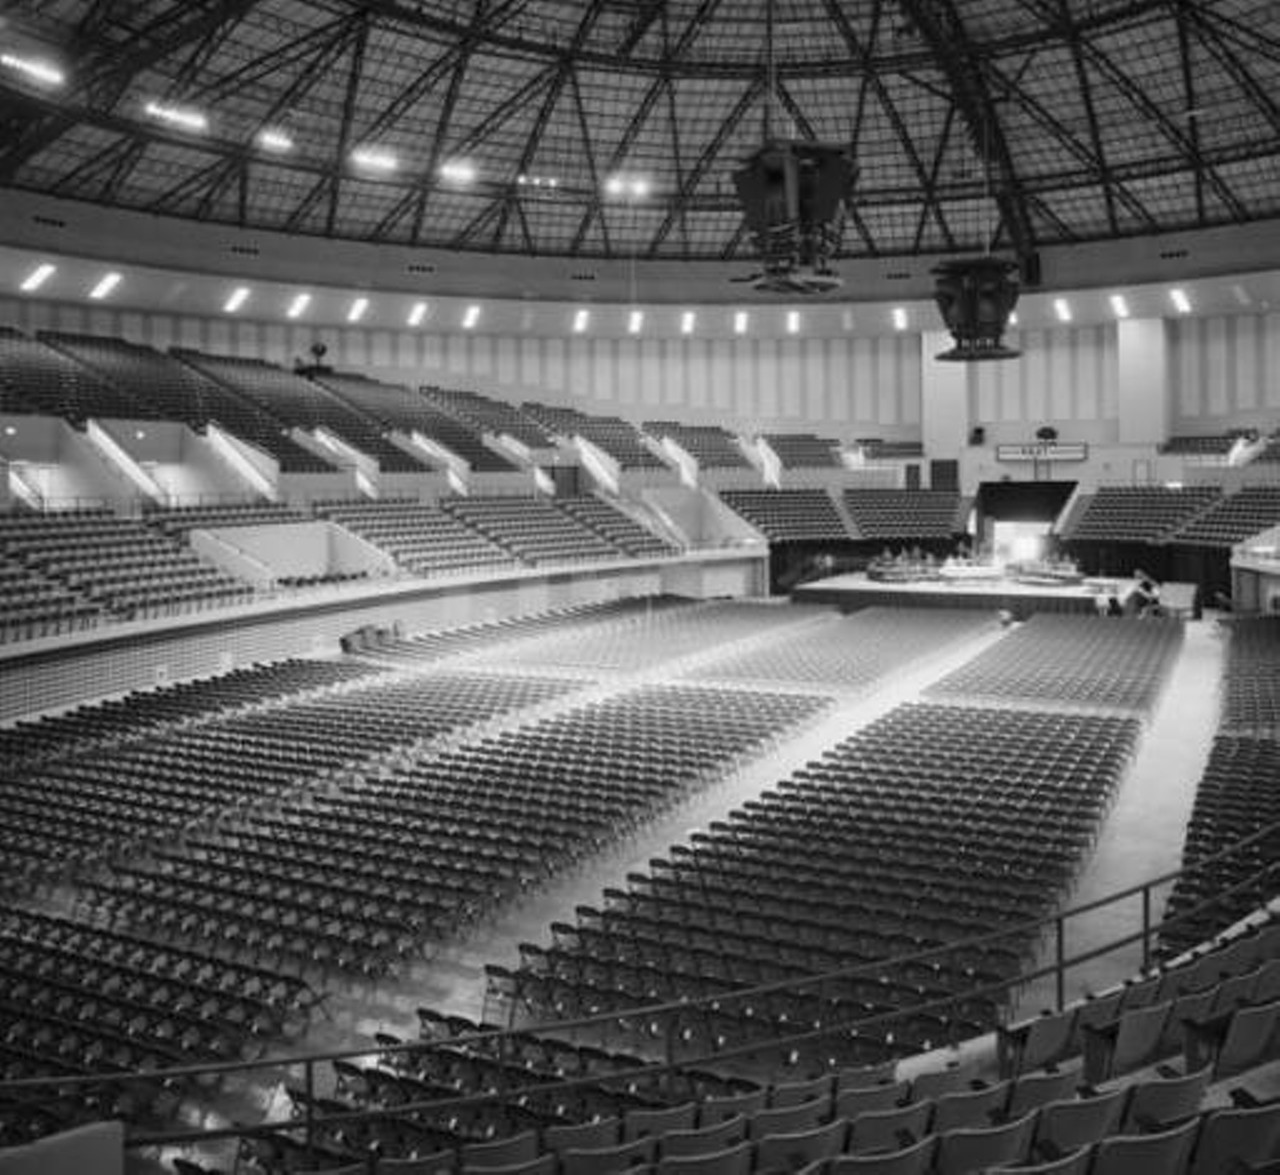 Interior of San Antonio Convention Center Arena, 1968
What is now the Henry B. González Convention Center was once simply the San Antonio Convention Center, which was originally built as part of HemisFair ’68.
Photo via Zintgraff Studio Photo Collection